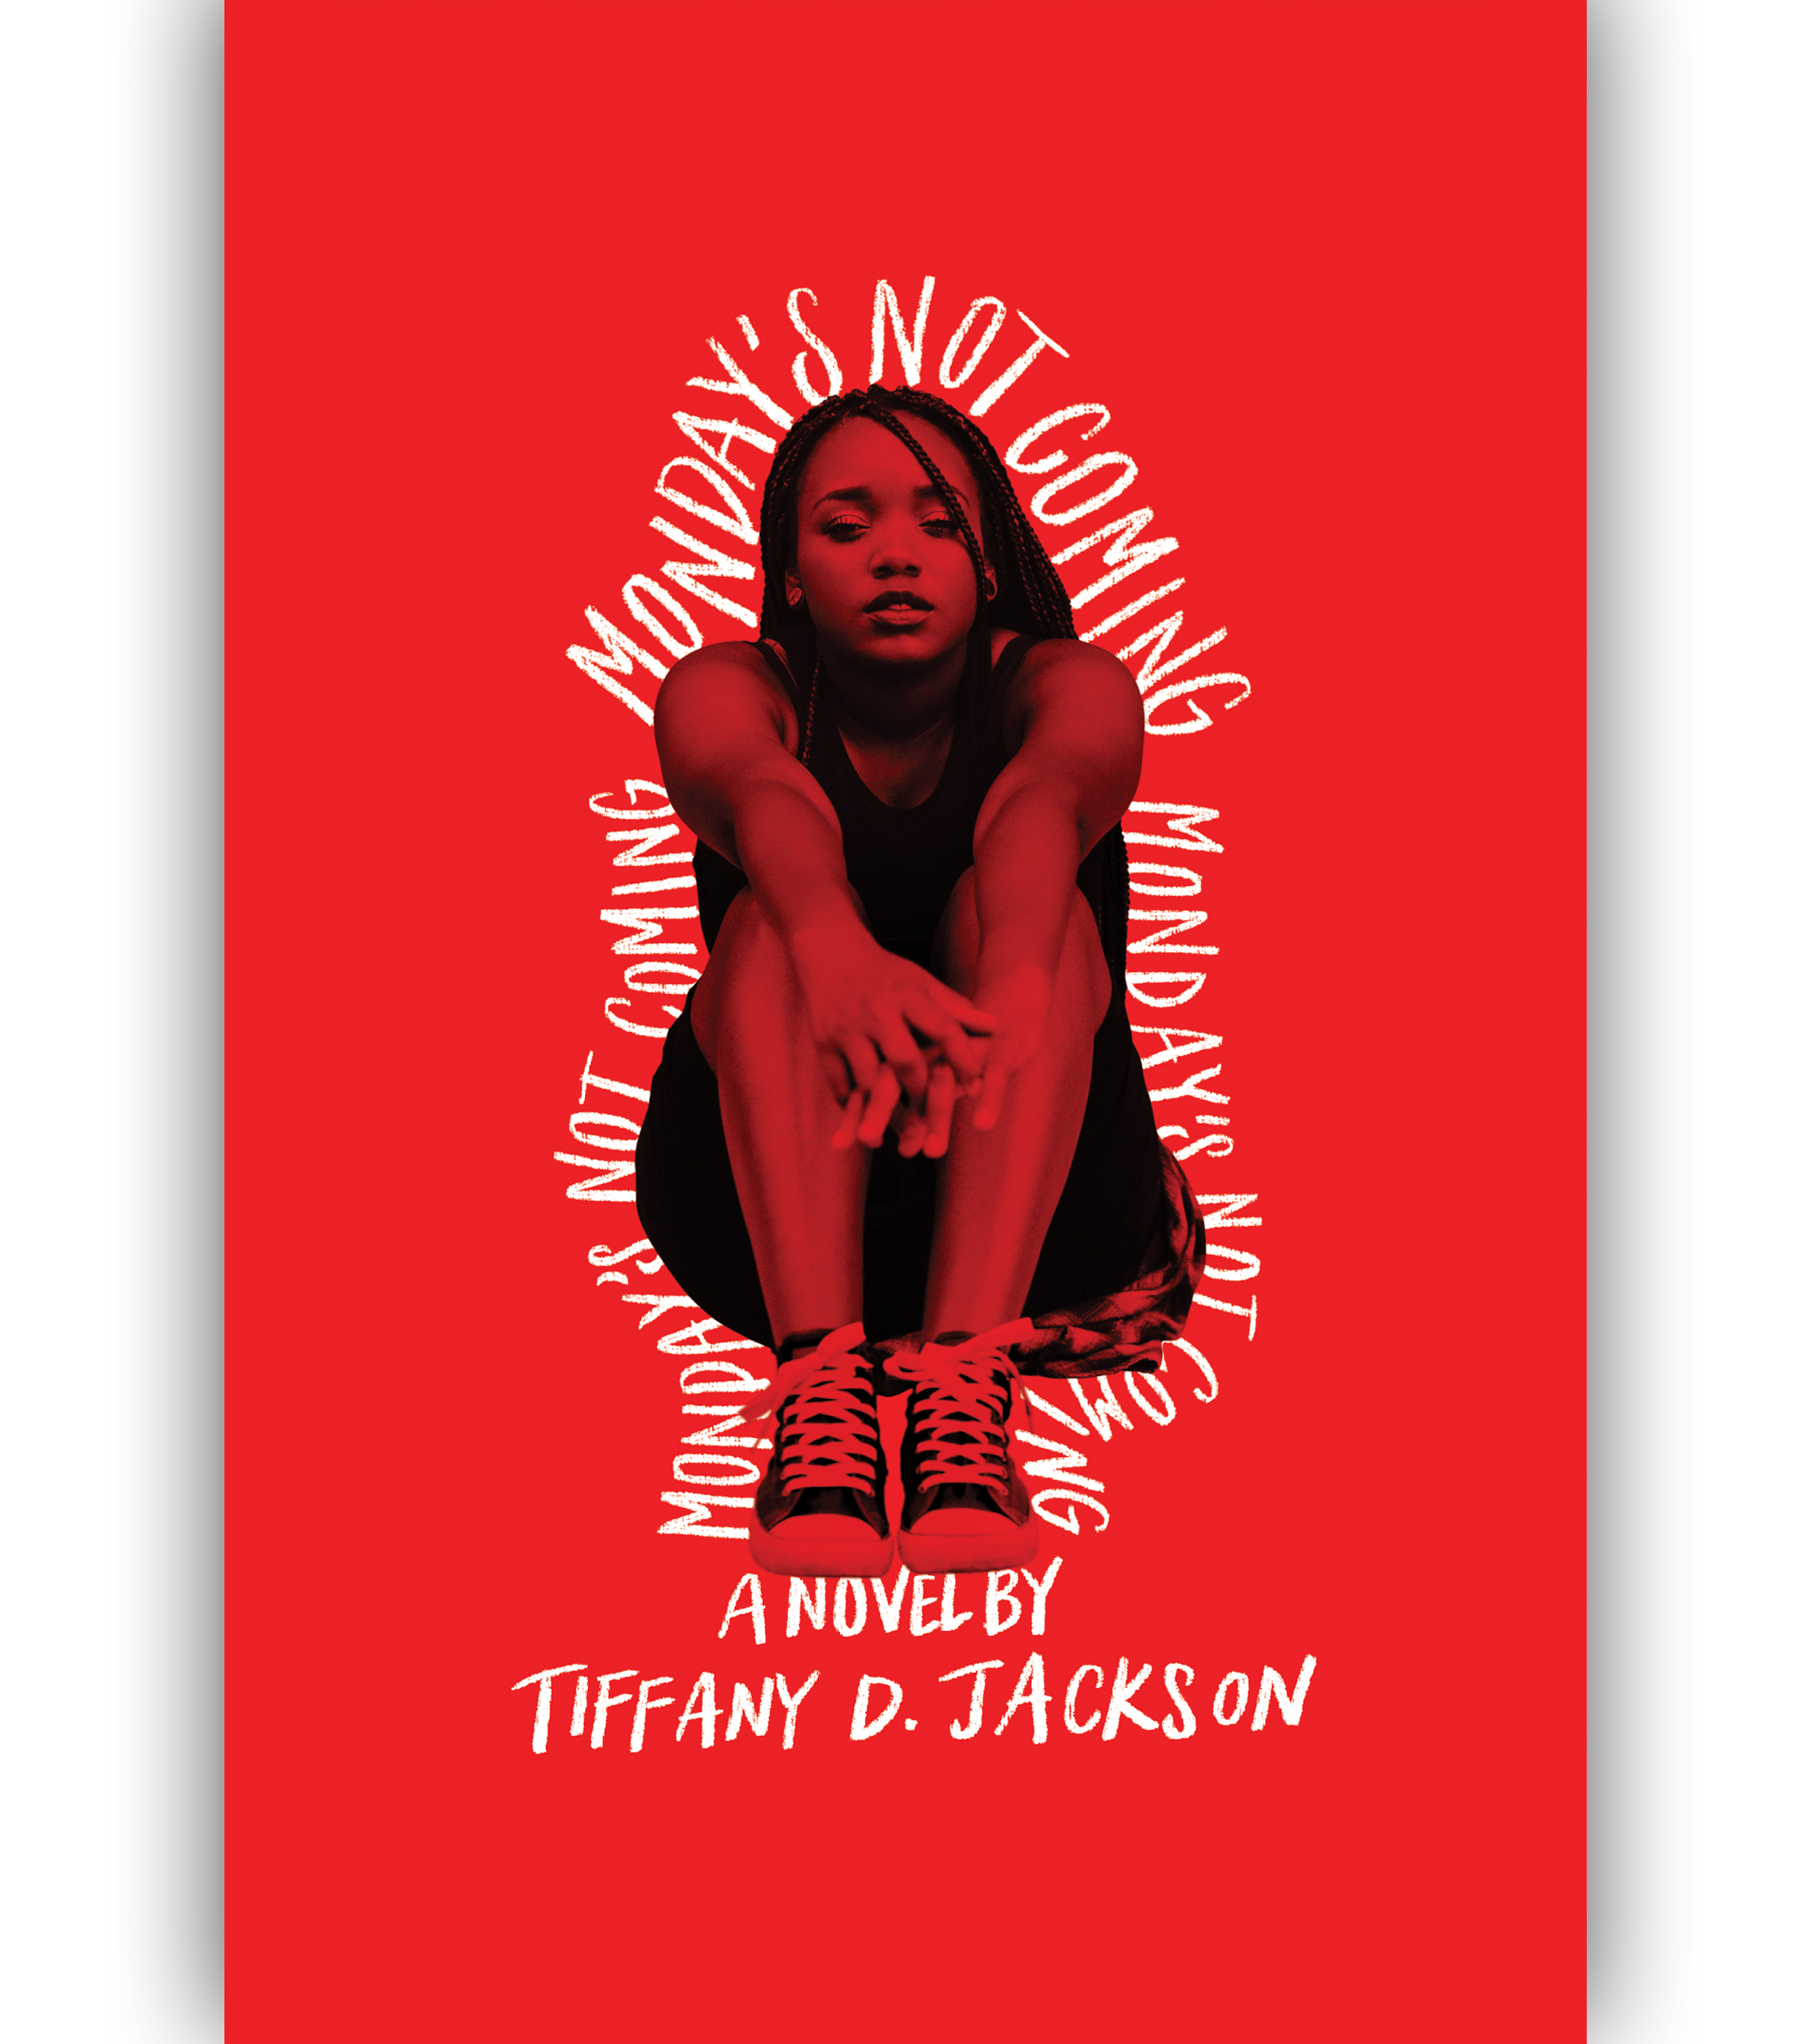 Monday's Not Coming by Tiffany D. Jackson Book Cover